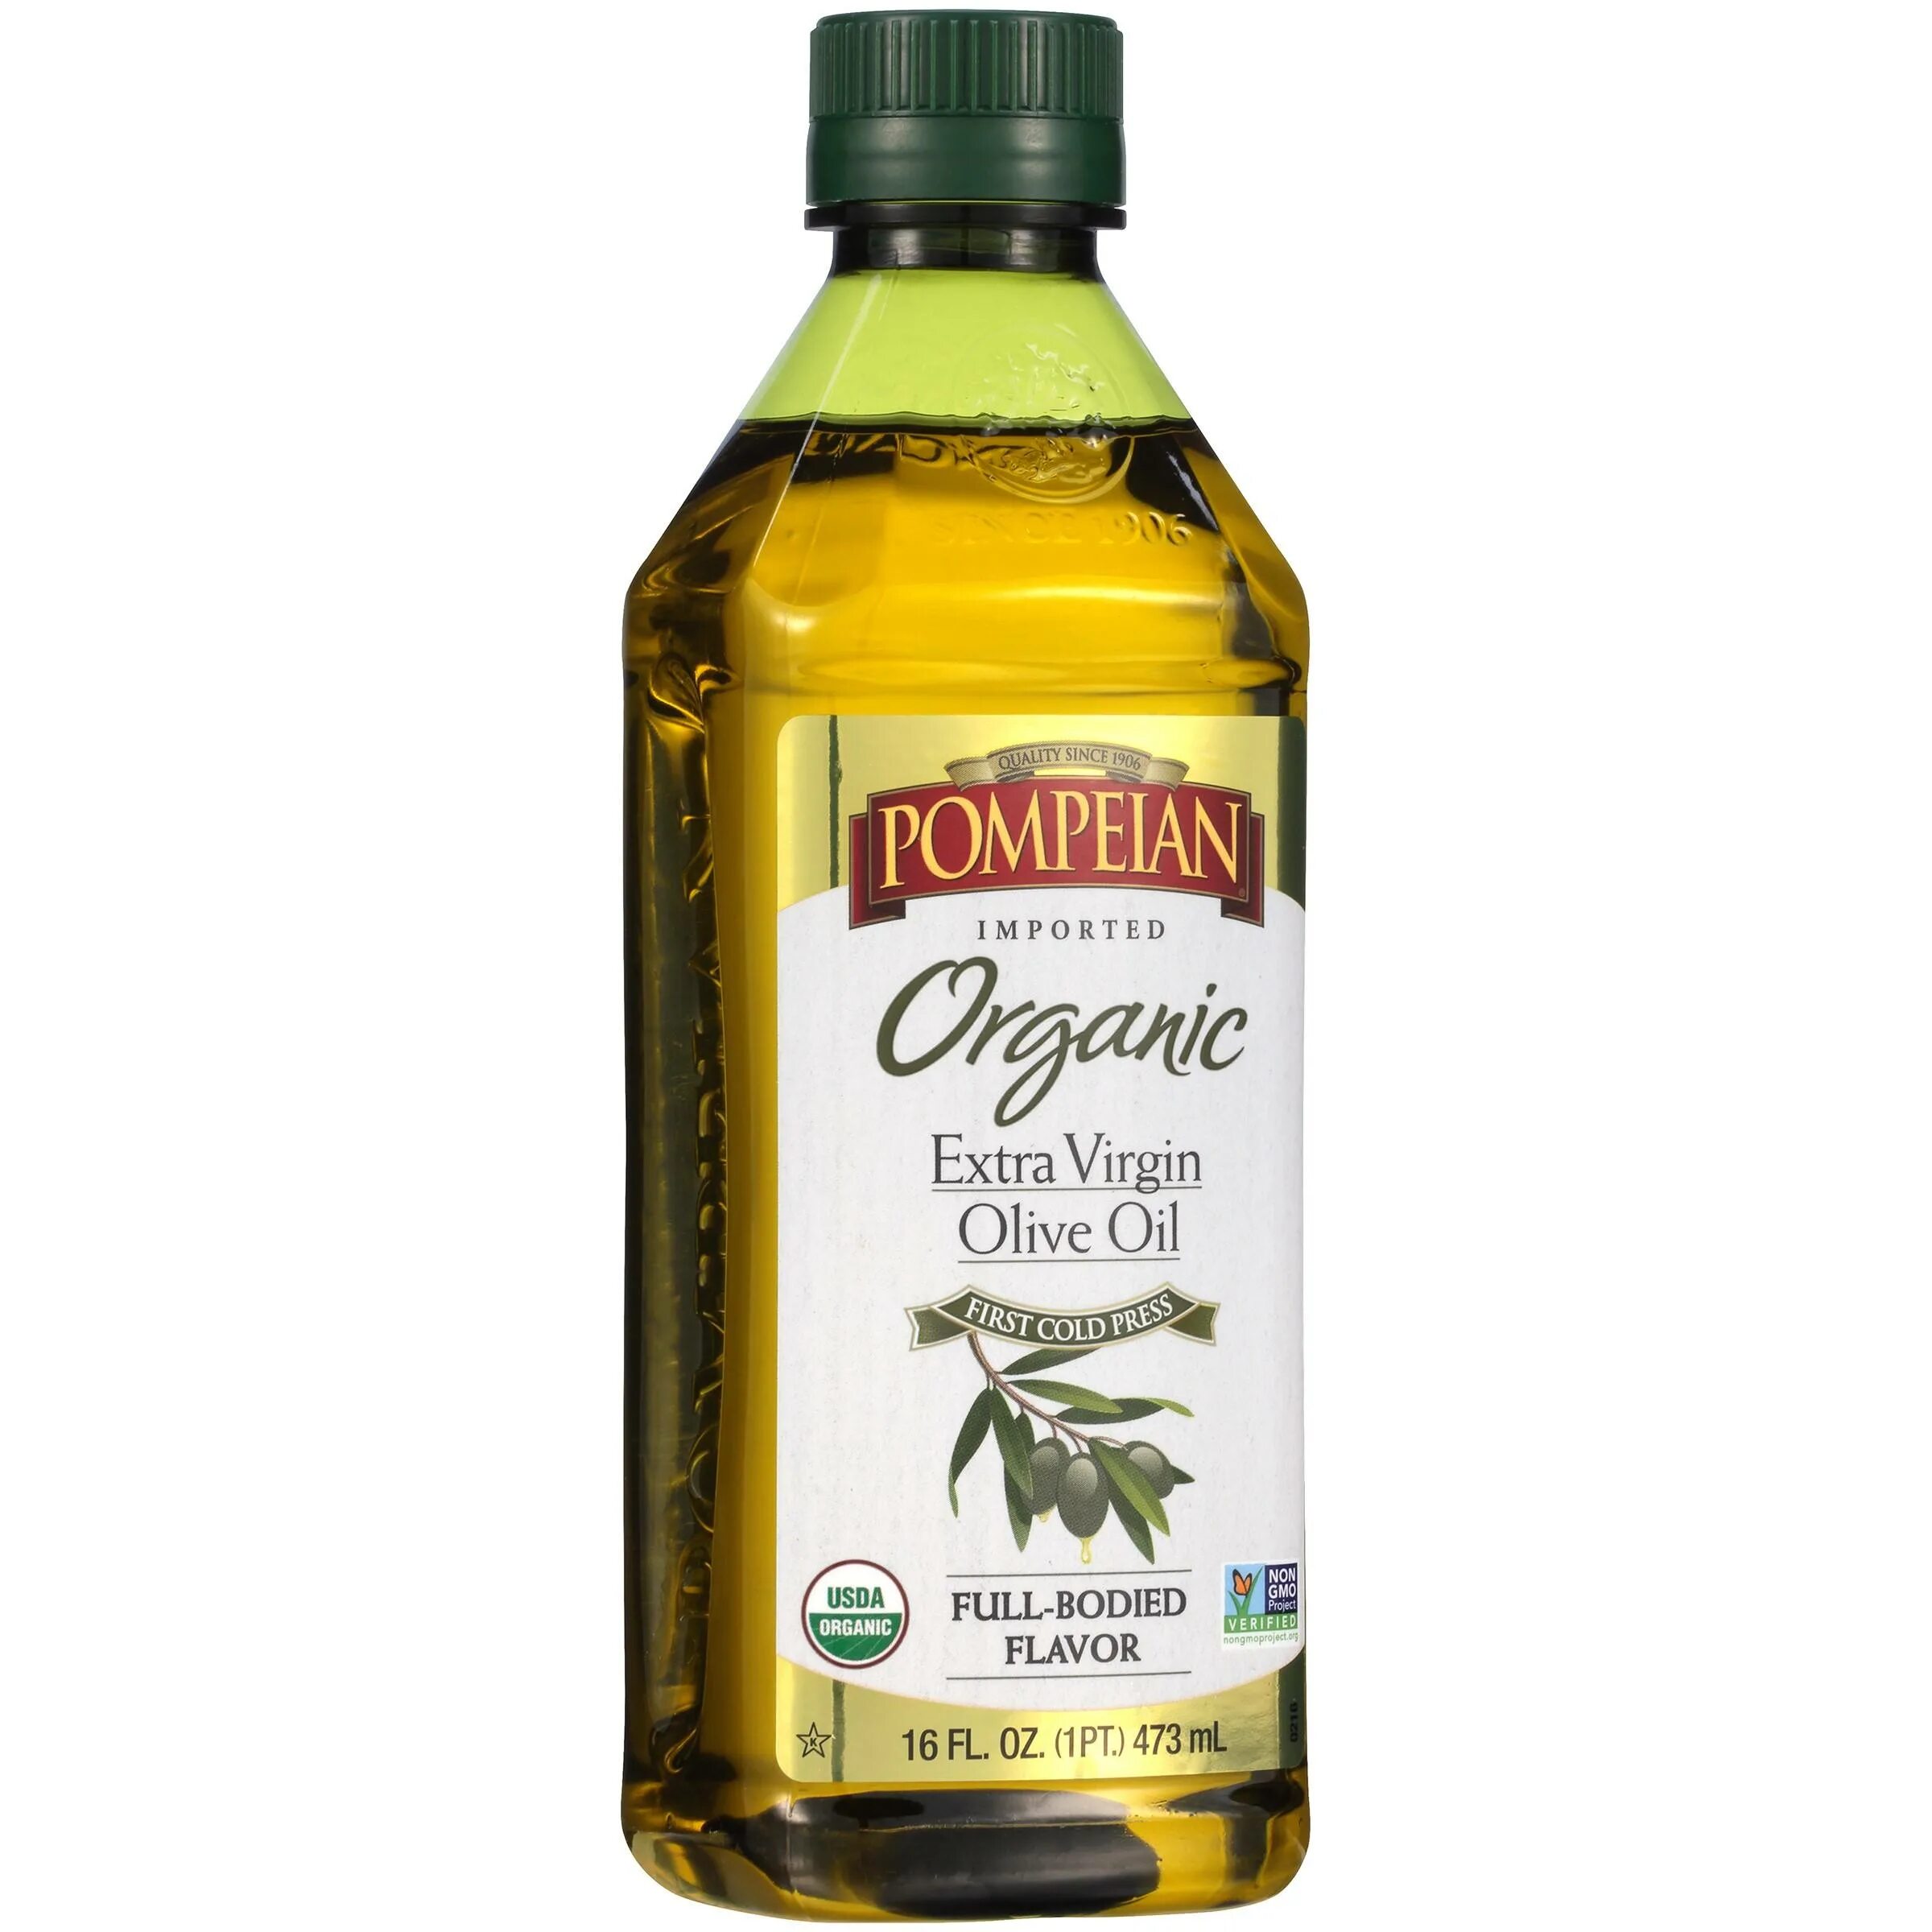 Масло Extra Virgin Olive Oil. Оливковое масло Extra Virgin Olive Oil. Оливковое масло Экстра Вирджин Olive Oil. Оливковое масло Extra Virgin Olive. Продам оливковое масло